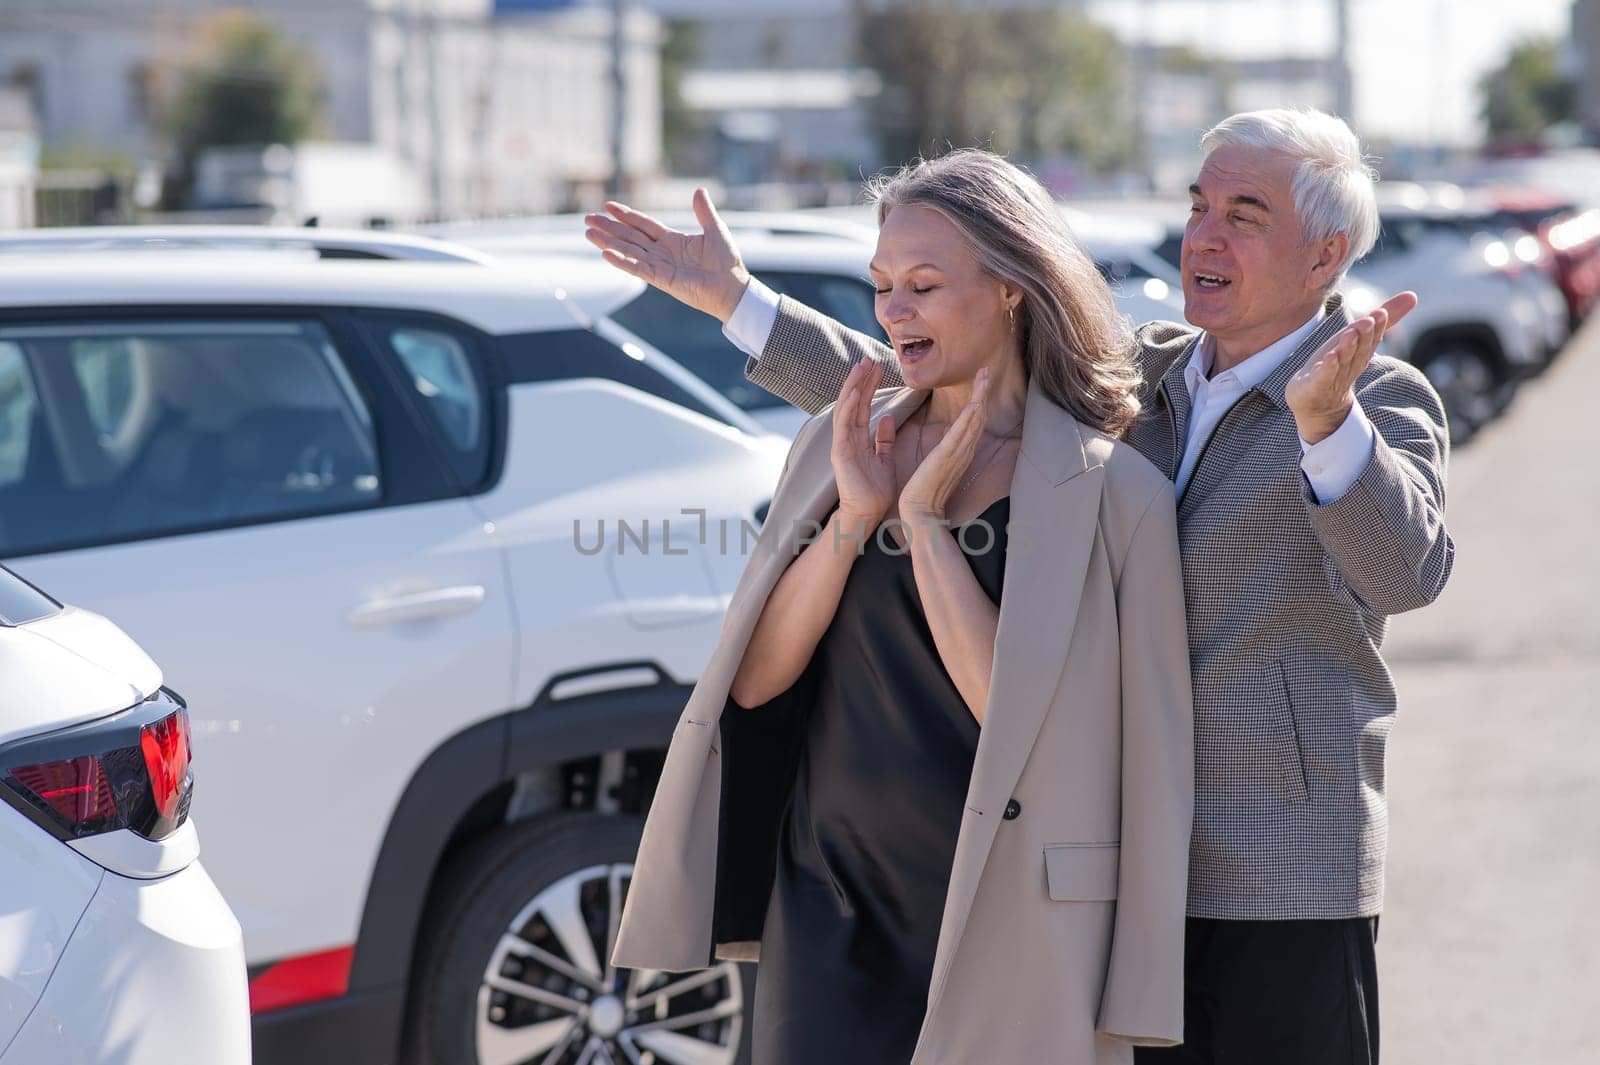 An elderly Caucasian man gives a new car to his beloved woman